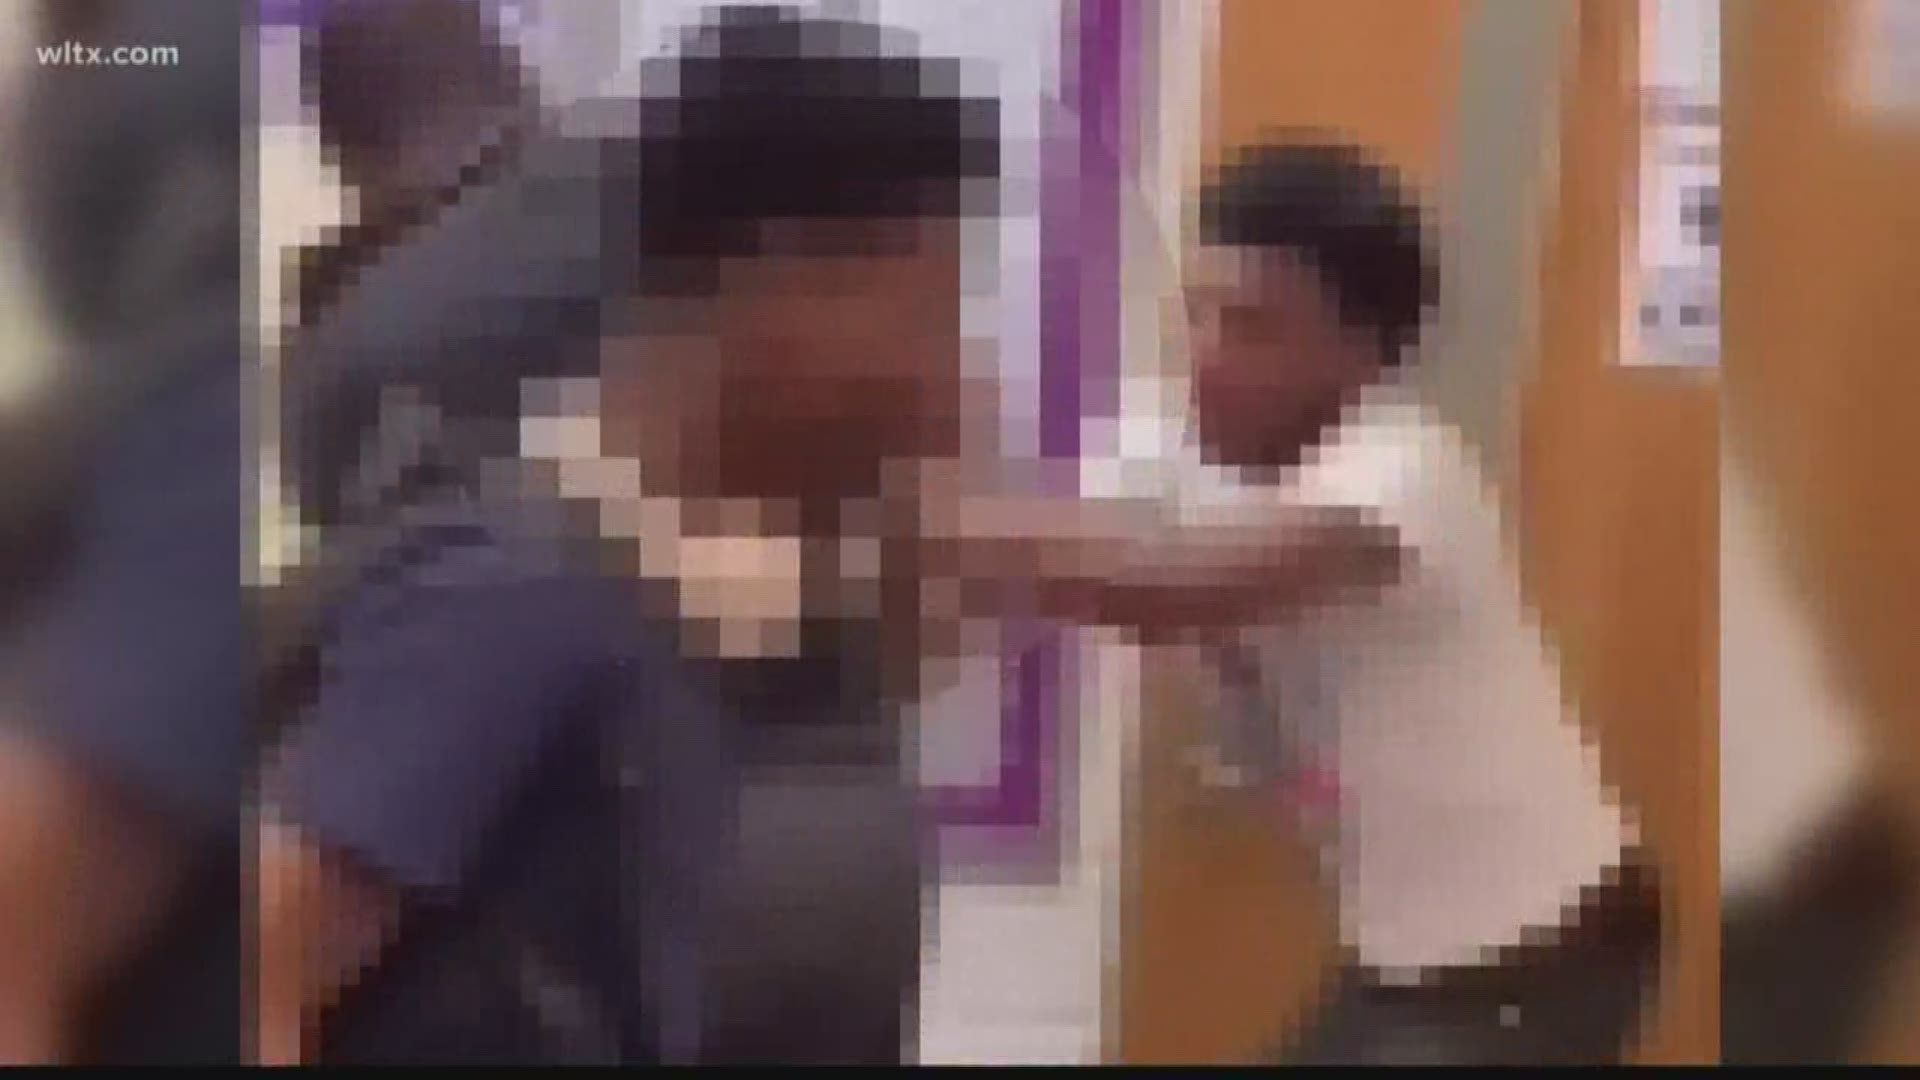 According to the district a teacher and a 15-year-old student got into a physical fight in a classroom